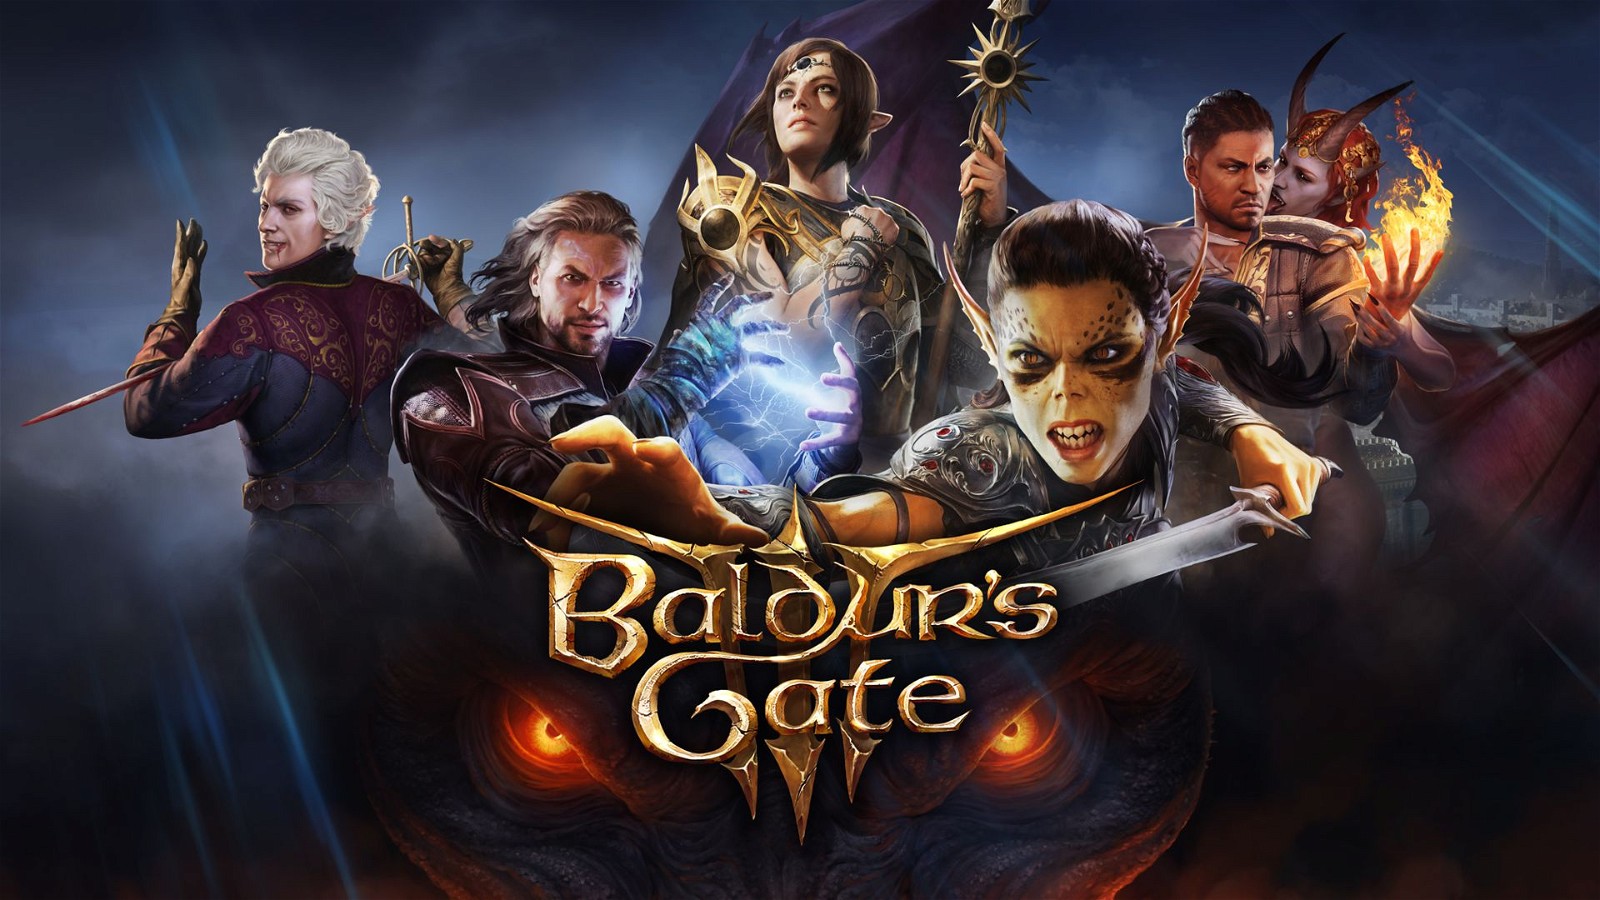 Baldur's Gate III release date moved up to August 3 for PC, delayed to  September 6 for PS5 - Gematsu